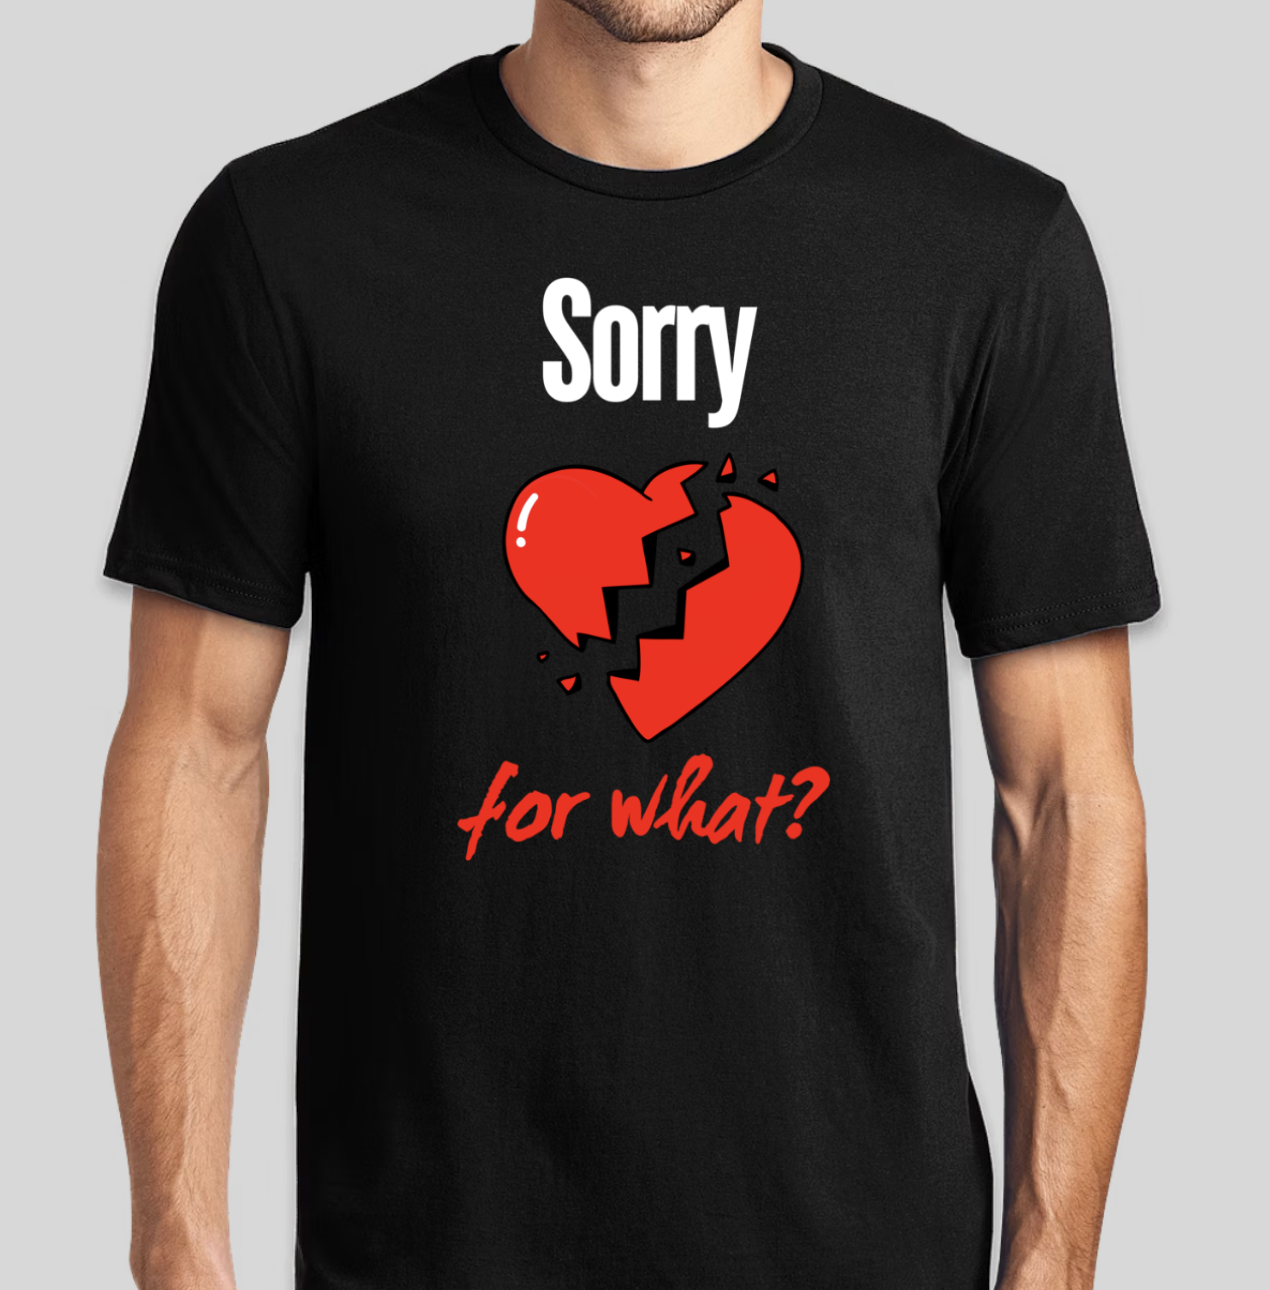 The Sorry For What t-shirt features an unapologetic phrase presented in a way that only BHS can achieve. The slim BHS logo is applied to the back of the t-shirt.